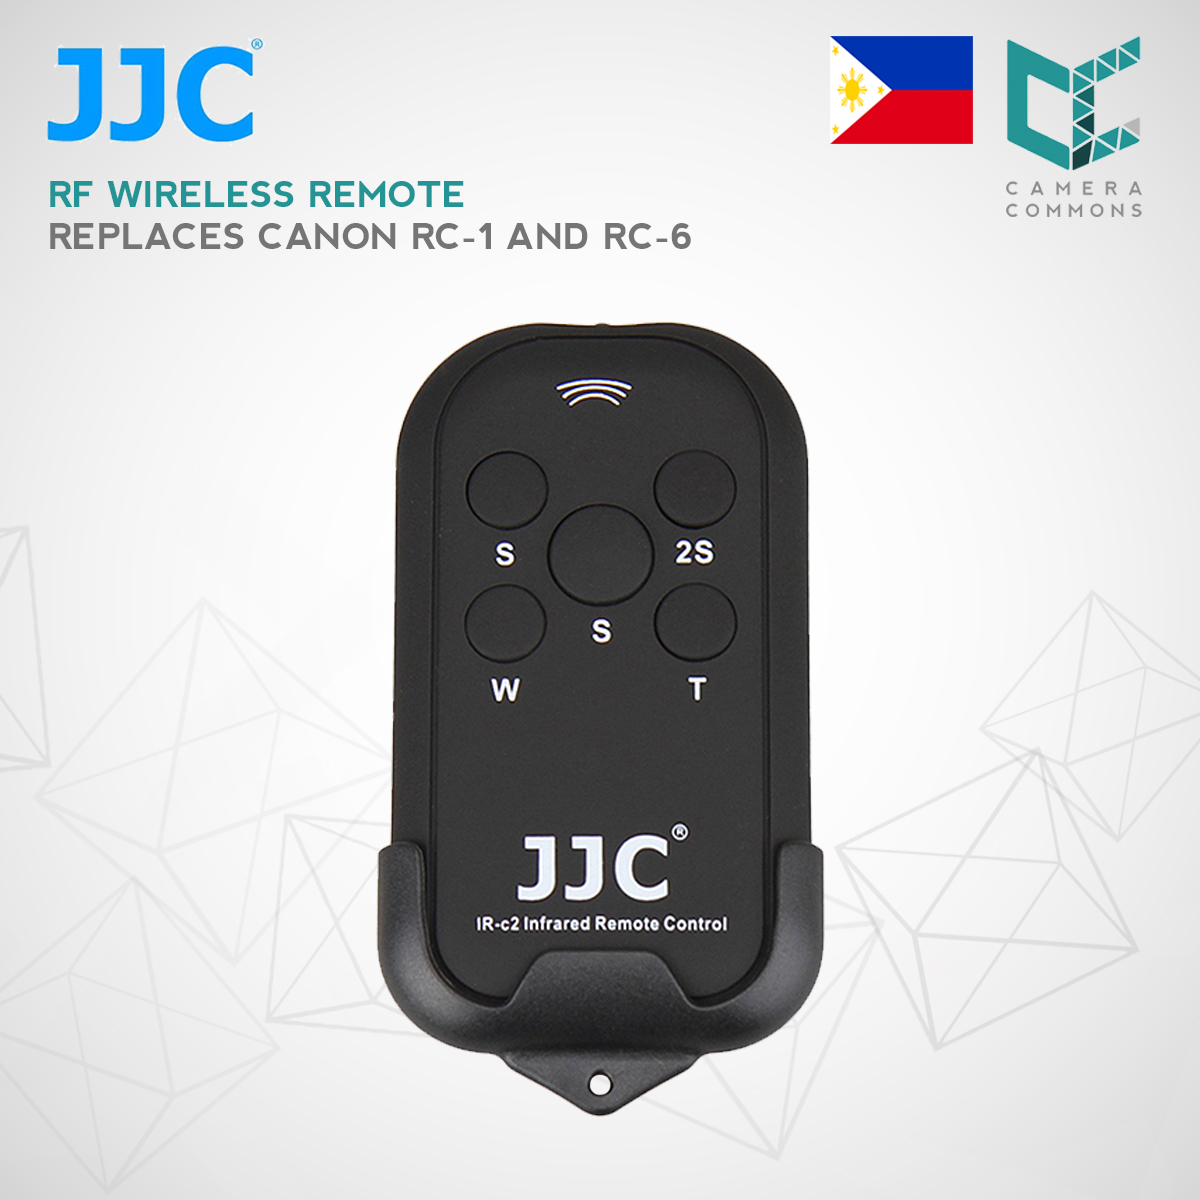 Replacement of Canon RC-6 IR Remote JJC Wireless Infrared IR Remote Control for Canon EOS Digital SLR and Compact Cameras